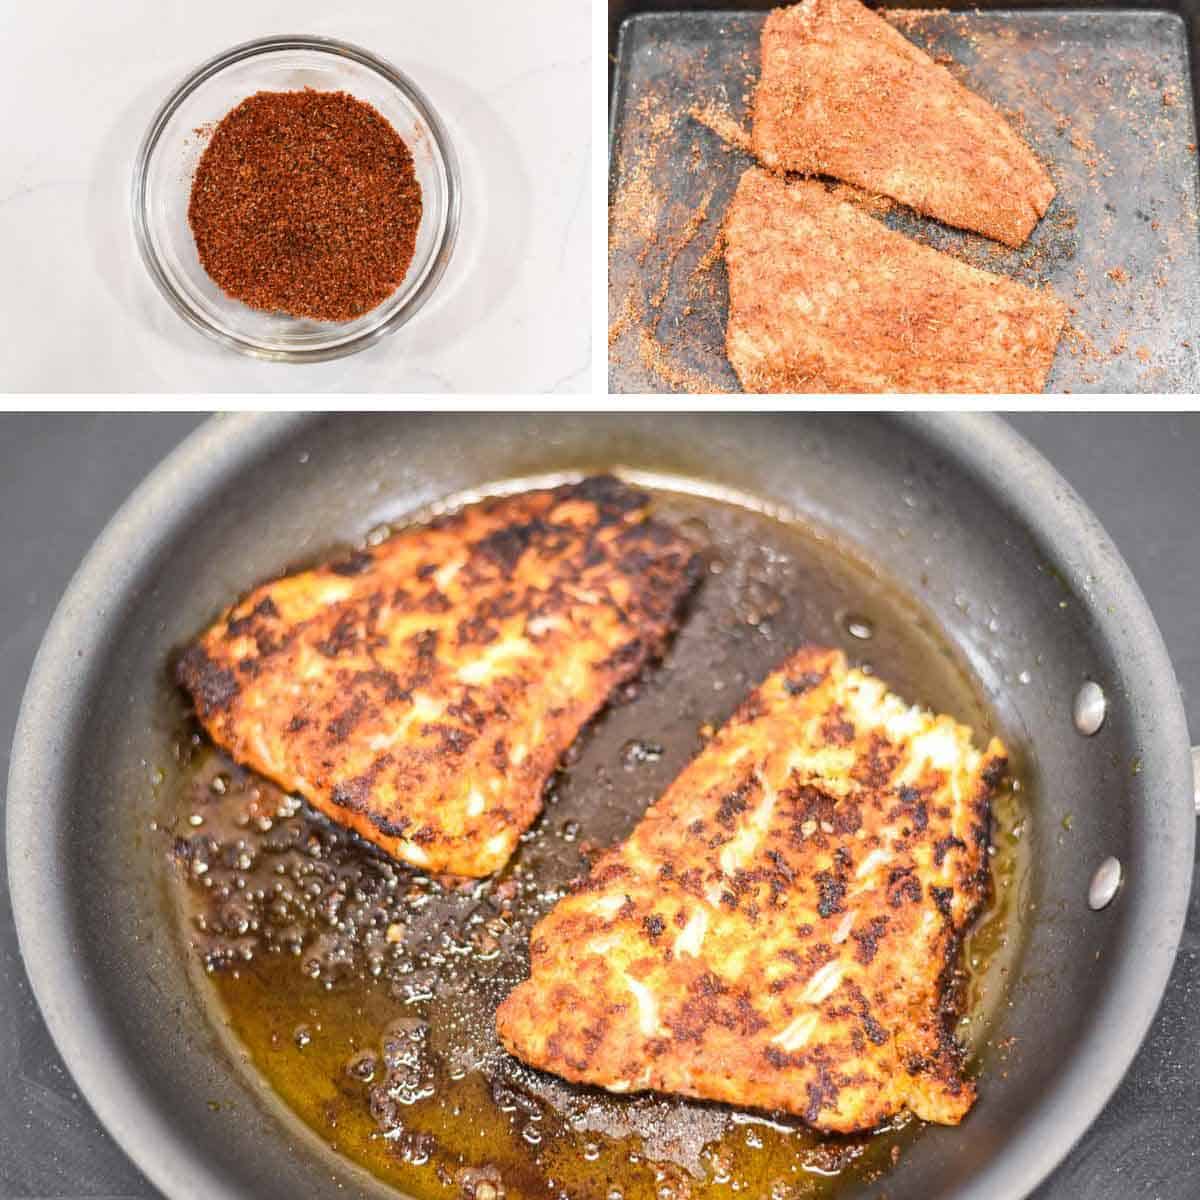 process shots of making rub, rubbing seasoning into fish and cooking in skillet